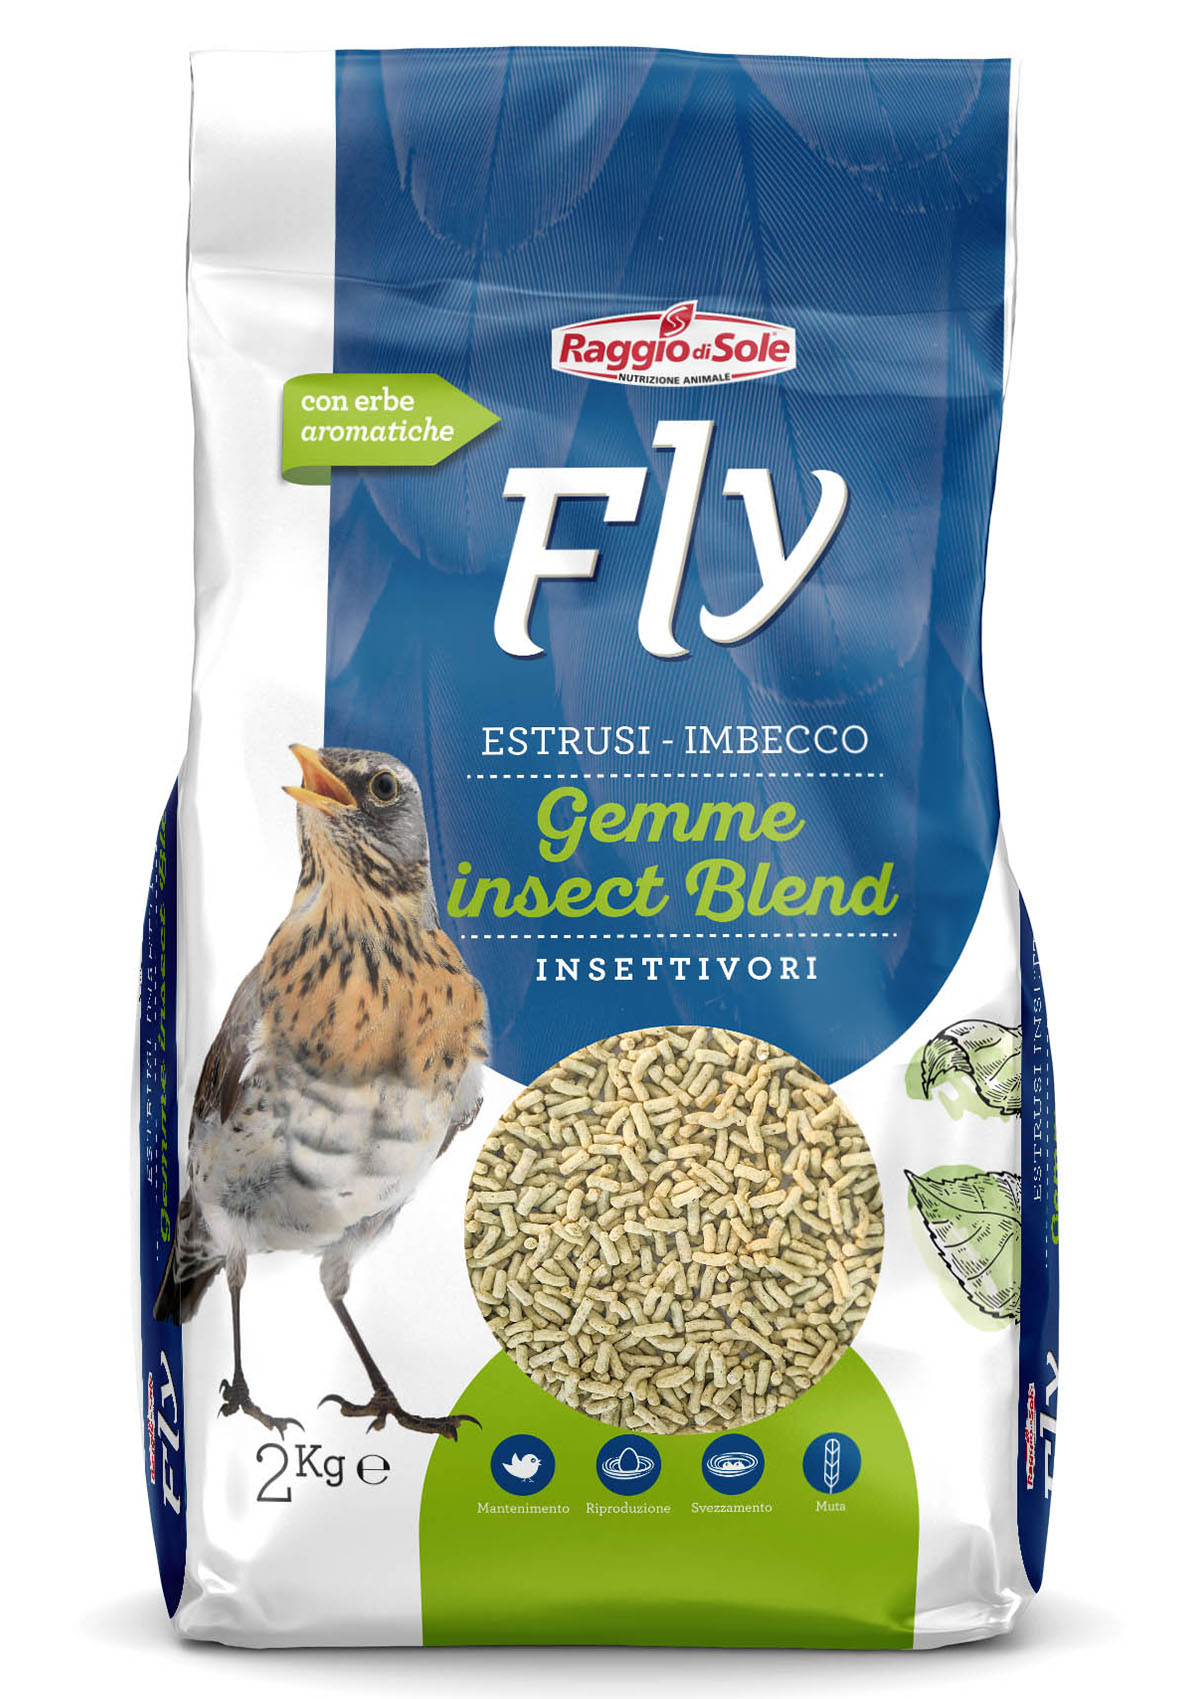 GEMME INSECT BLEND